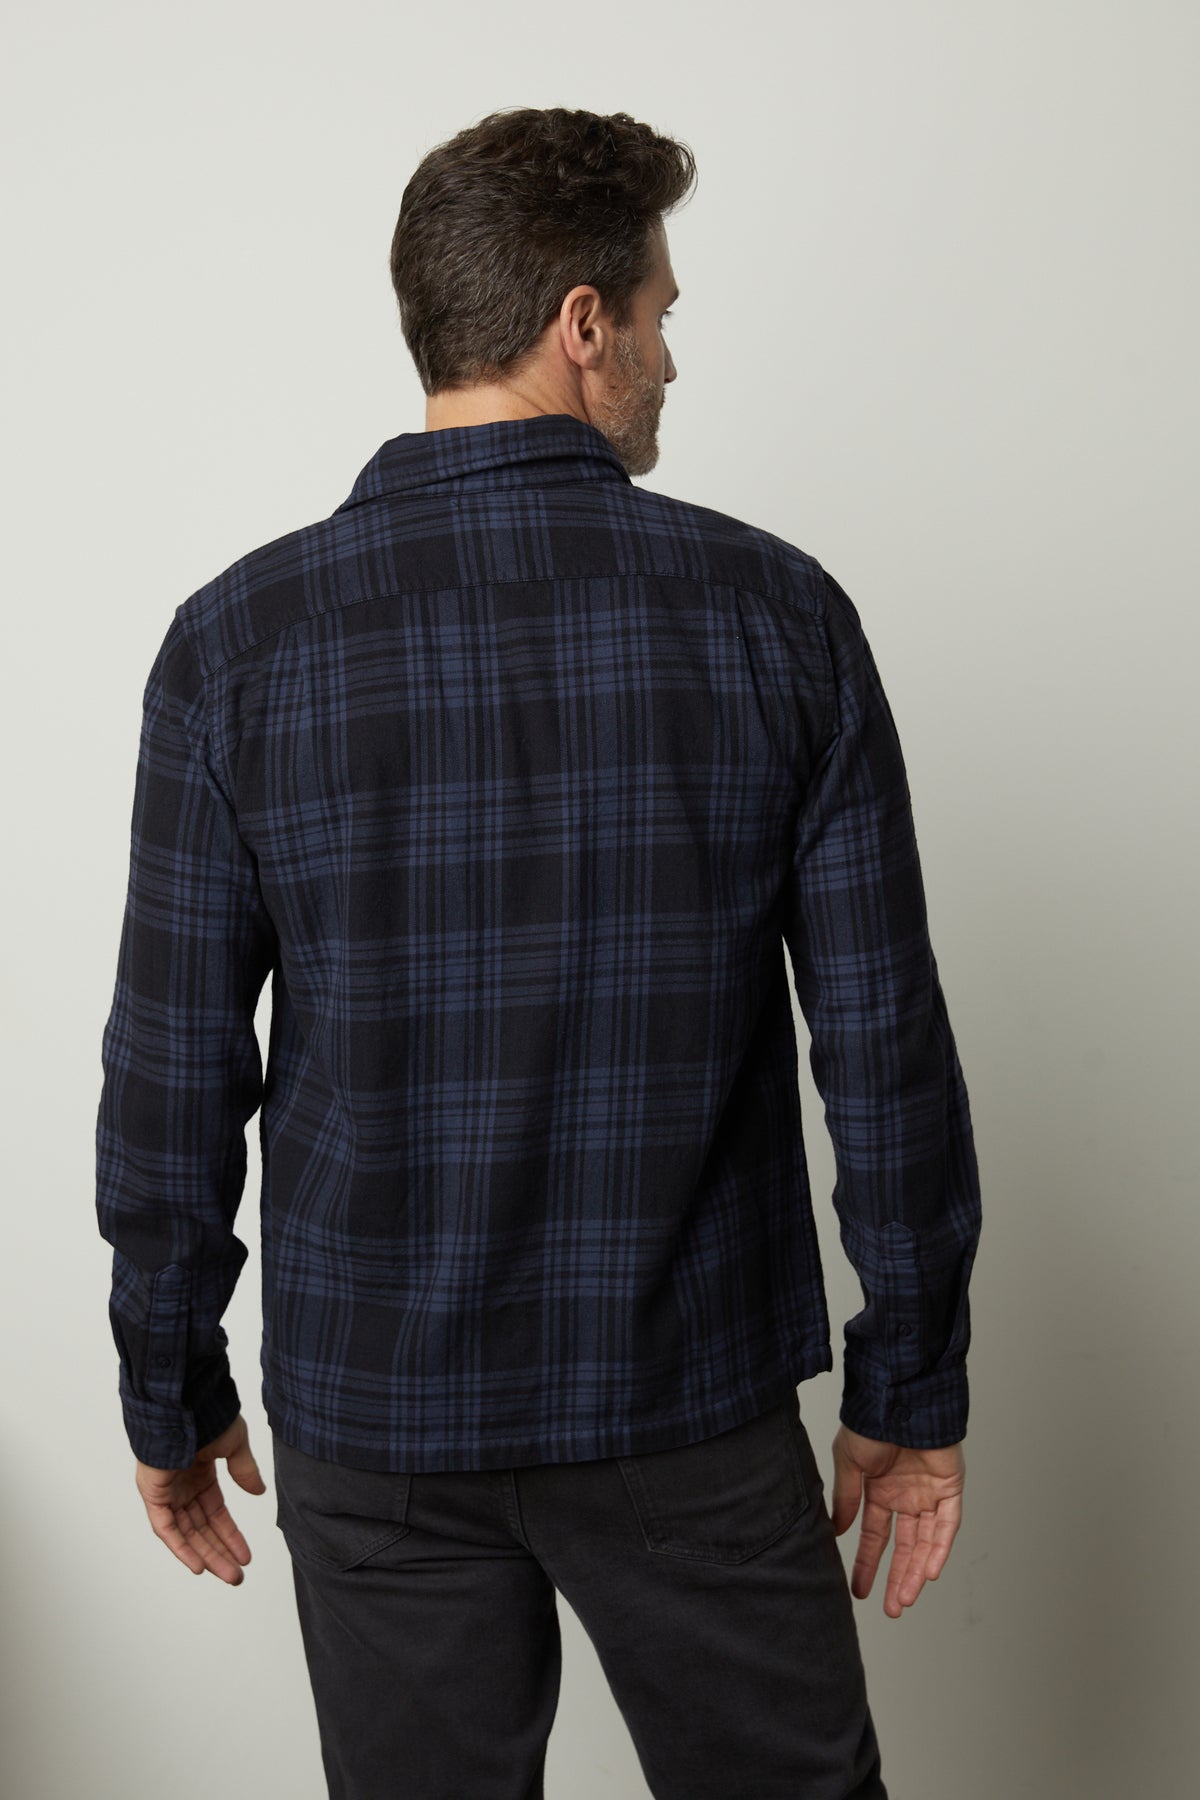   The back view of a man wearing a Velvet by Graham & Spencer FREDDY PLAID SHIRT. 